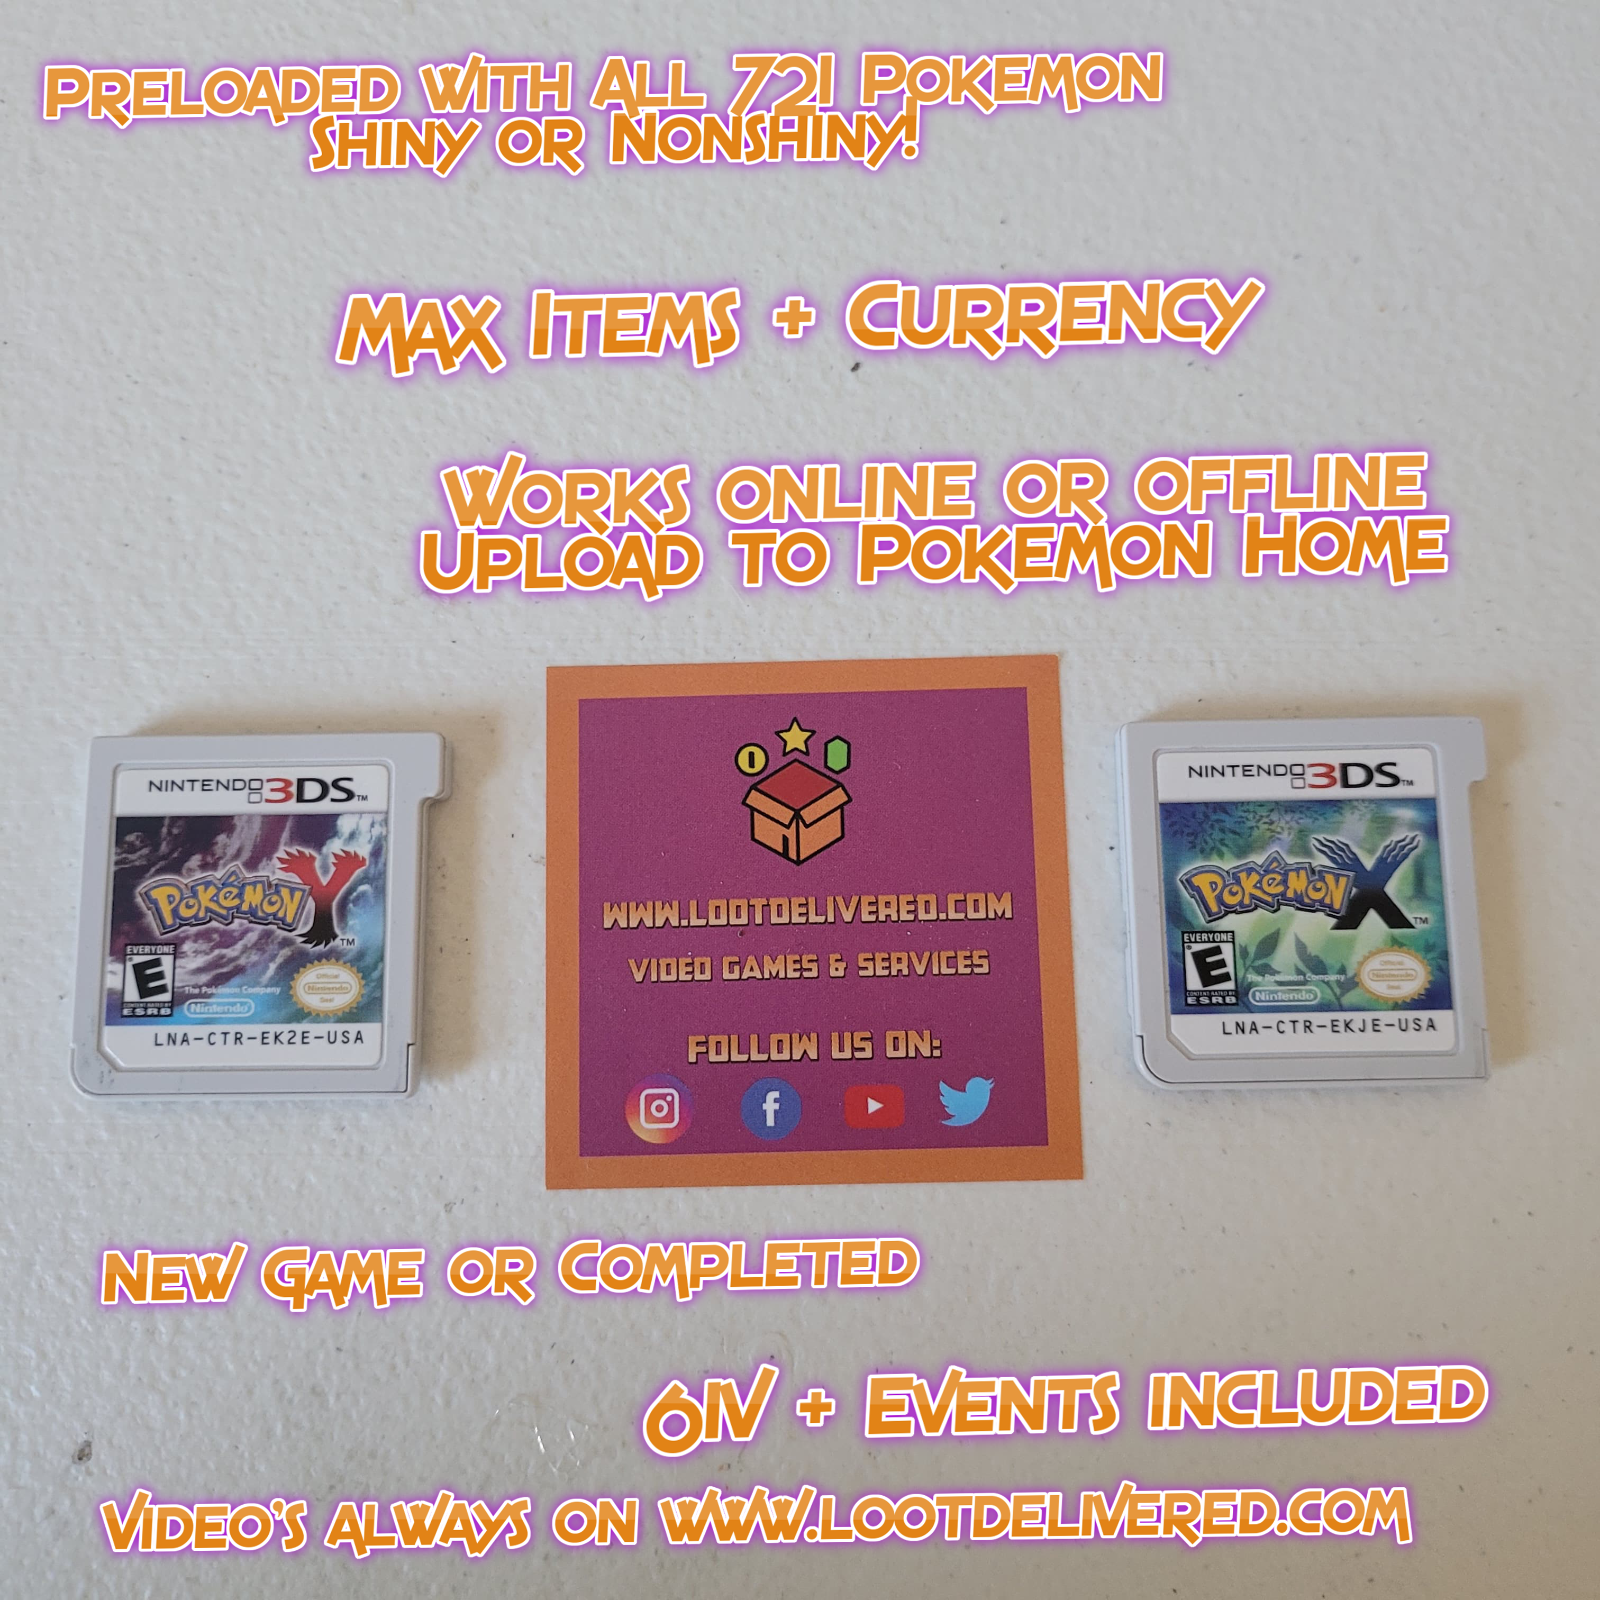 Pokemon Y Enhanced! - Loaded 3DS Pokemon With Legit Game) Enhanced 721 Event All (Physcial 